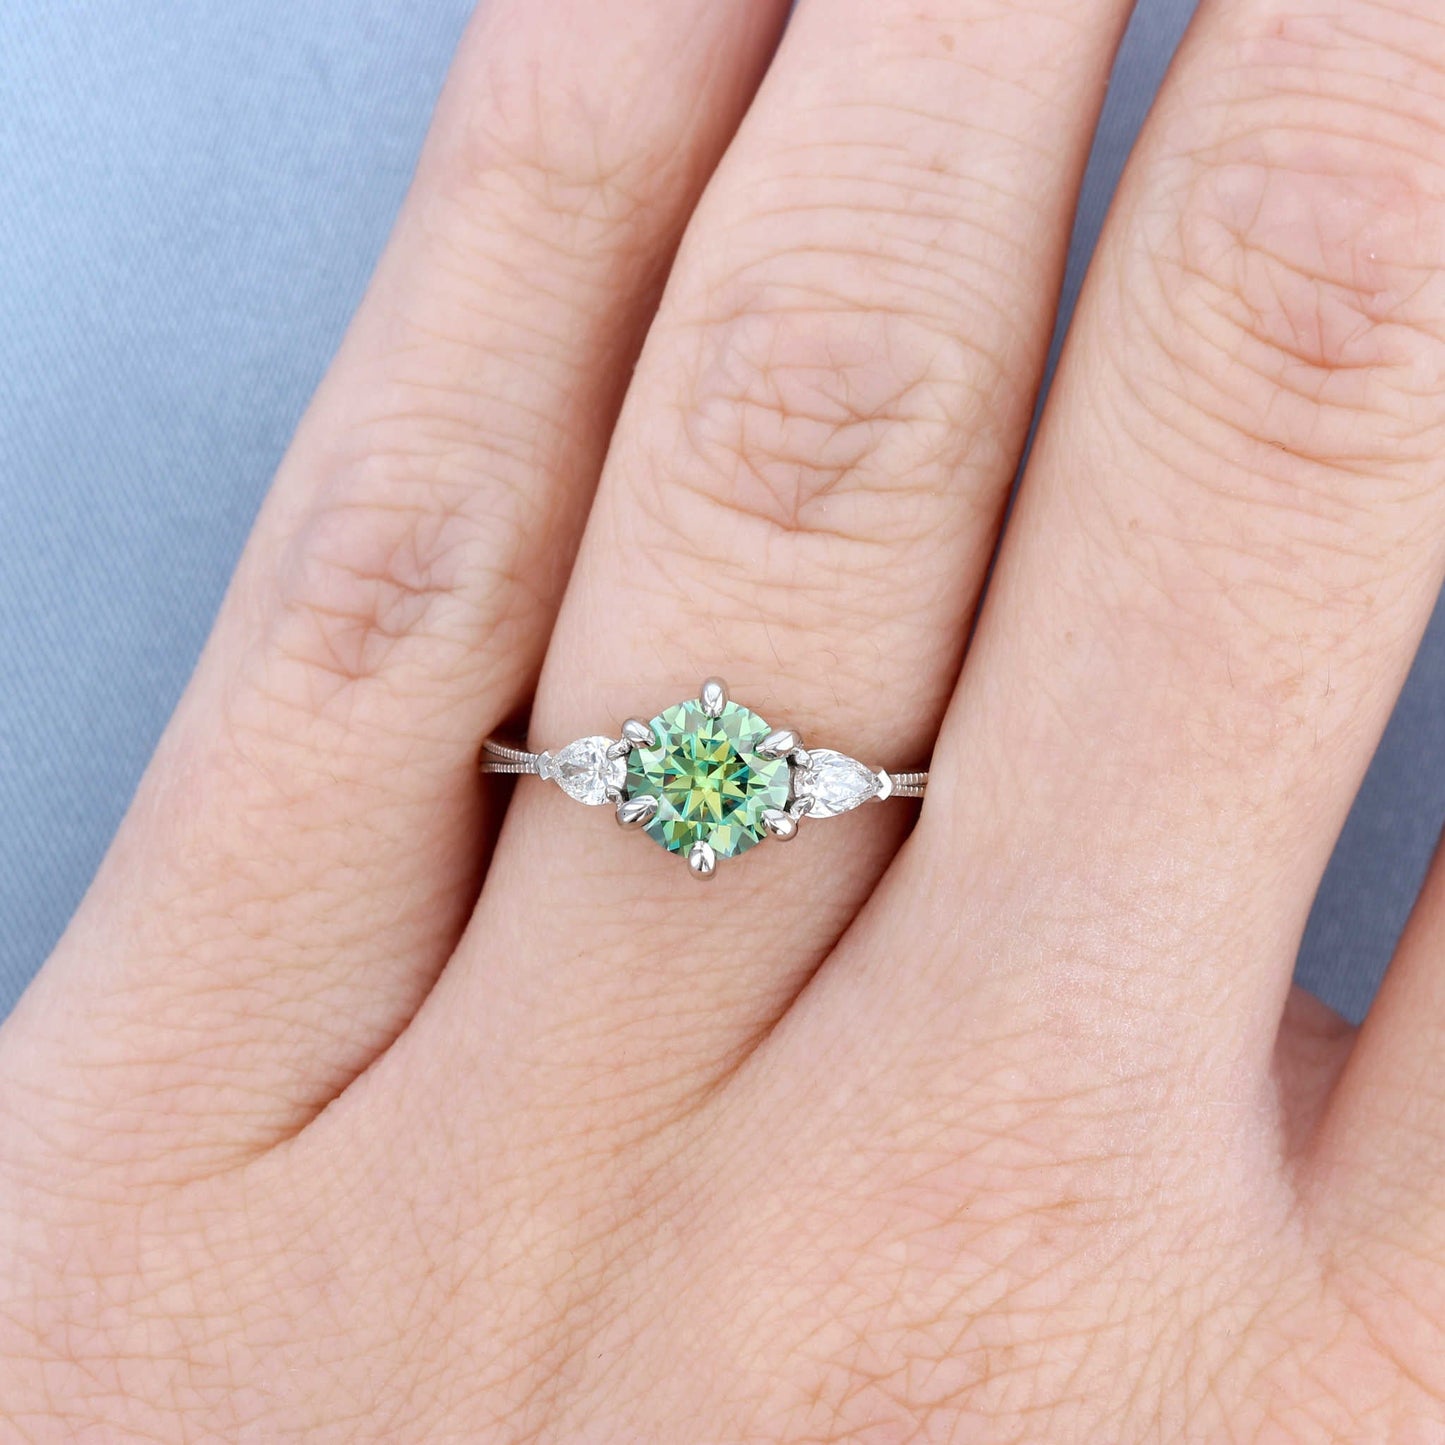 Green Moissanite Three Stone Engagement Ring on a Finger